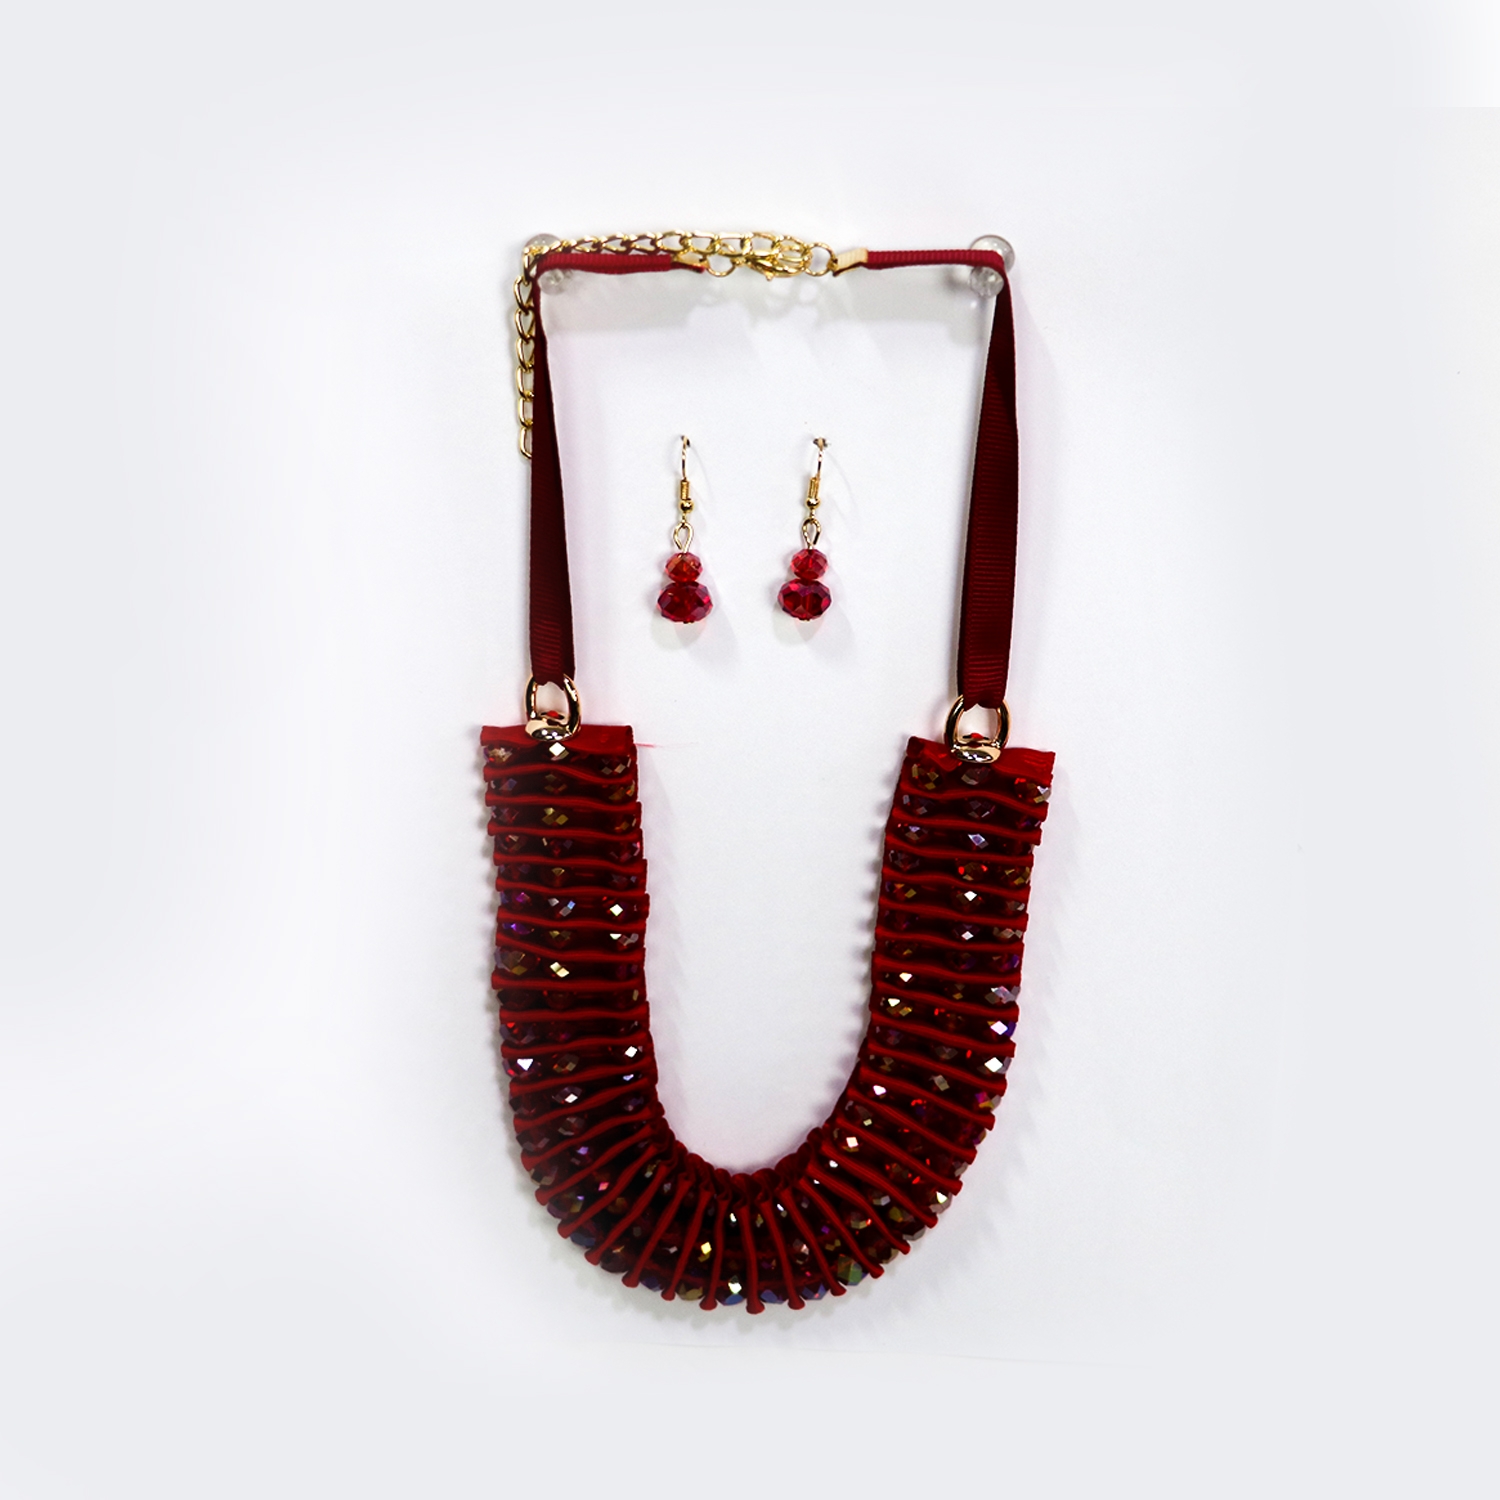 EMM | EMM's Pearl Studded Red Necklace Set For Women/Girls